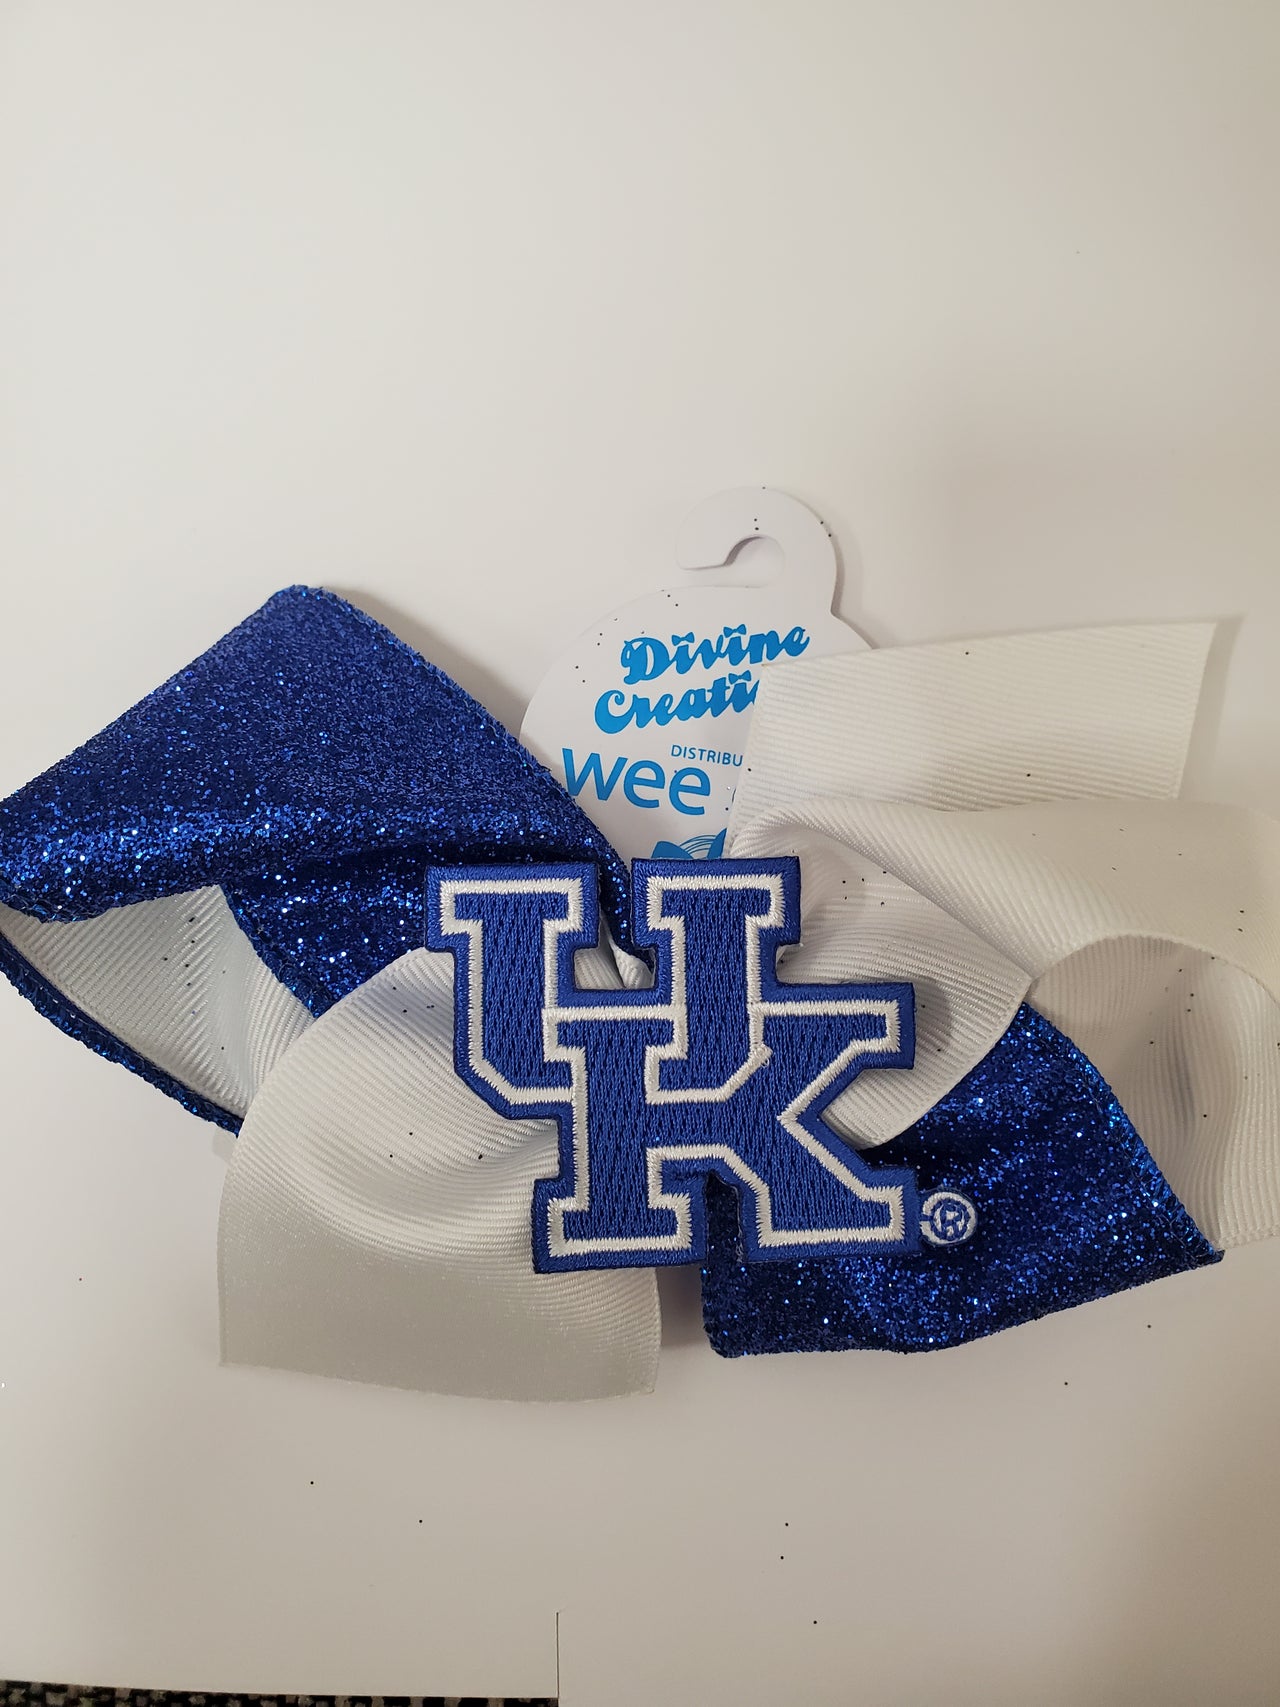 Large UK Bow with Blue Glitter and White Ribbon